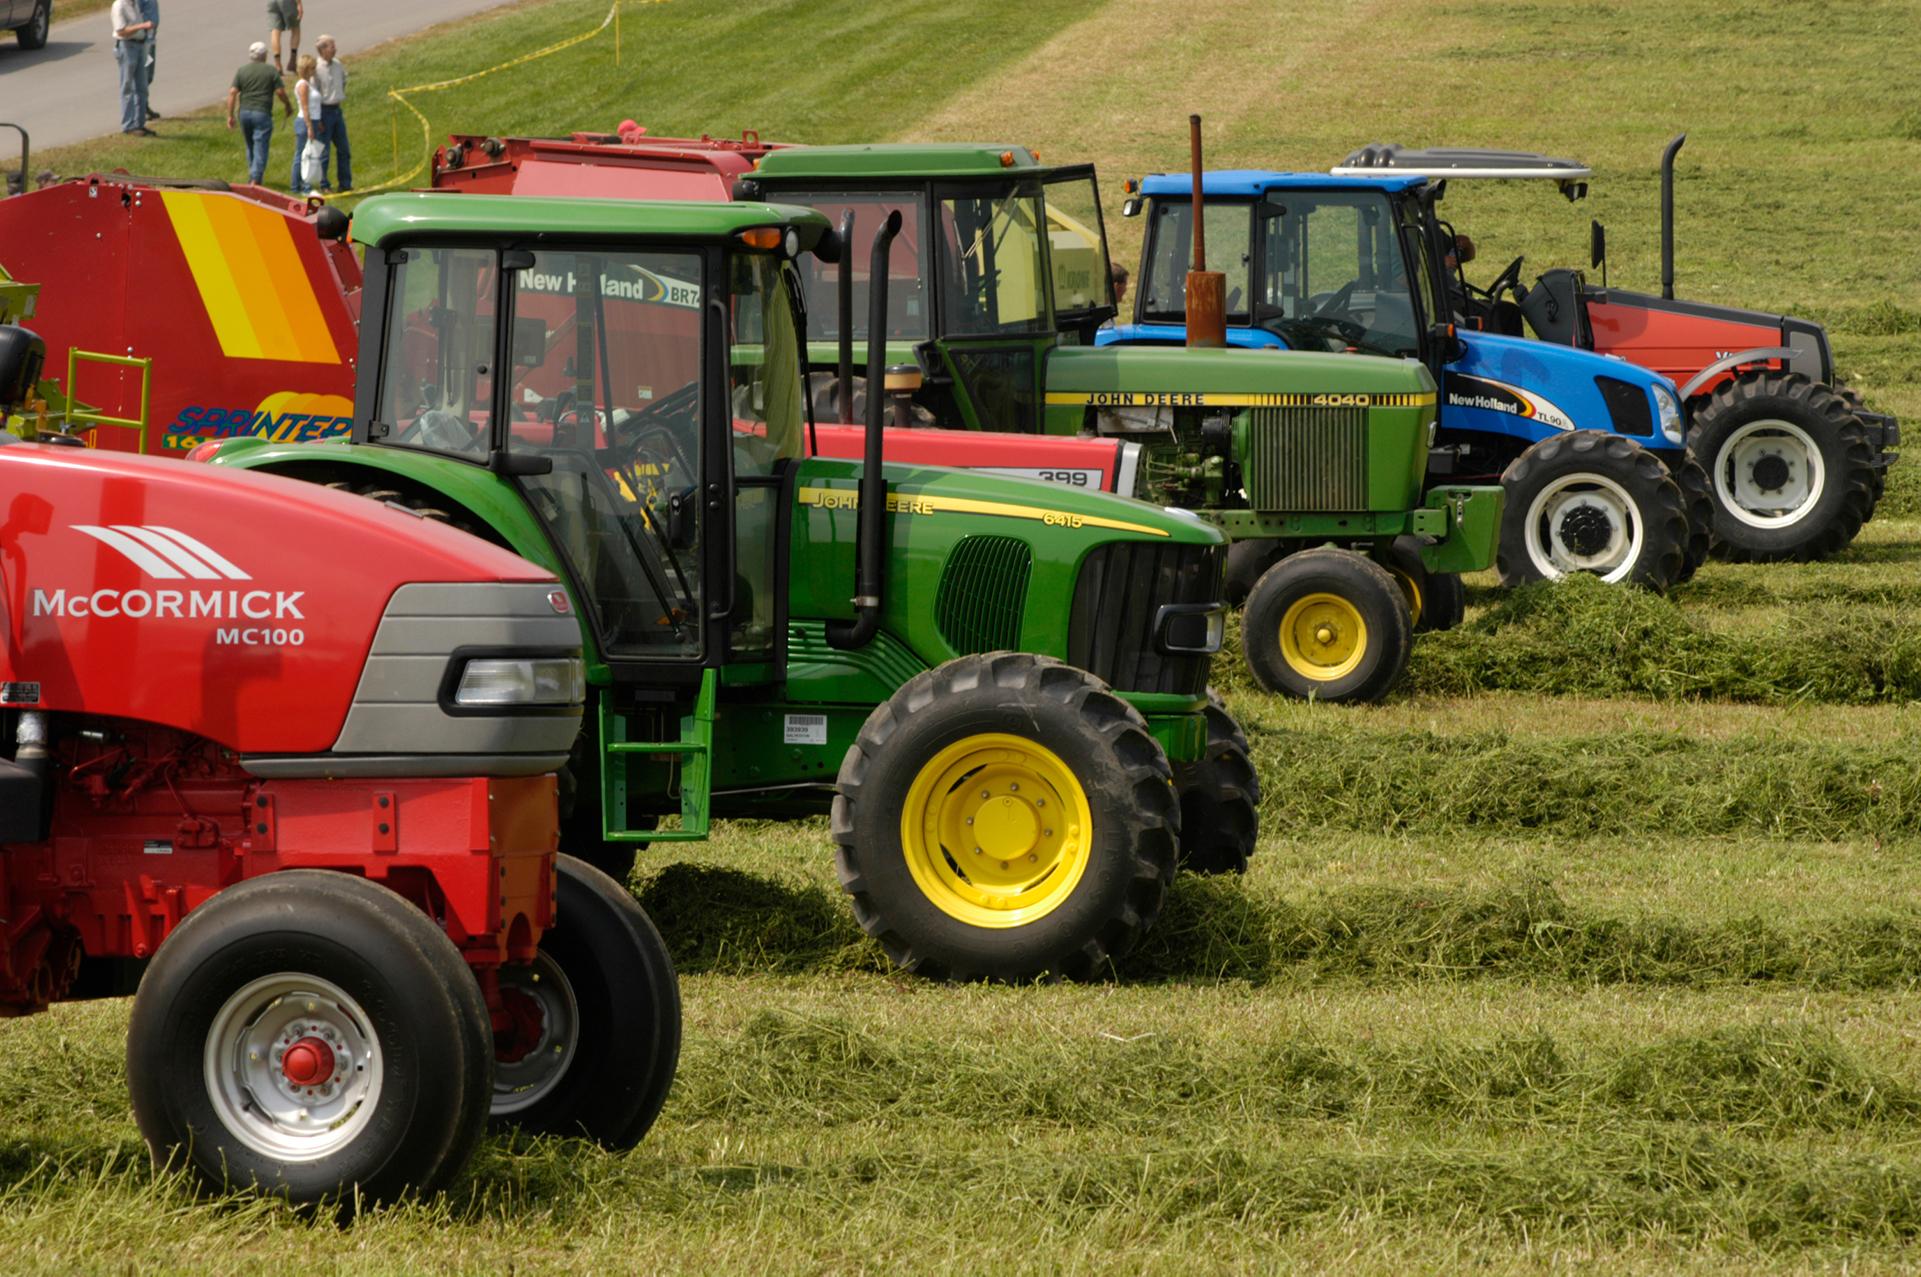 Farm Equipment Resources for Beginning Farmers University of Maryland Extension